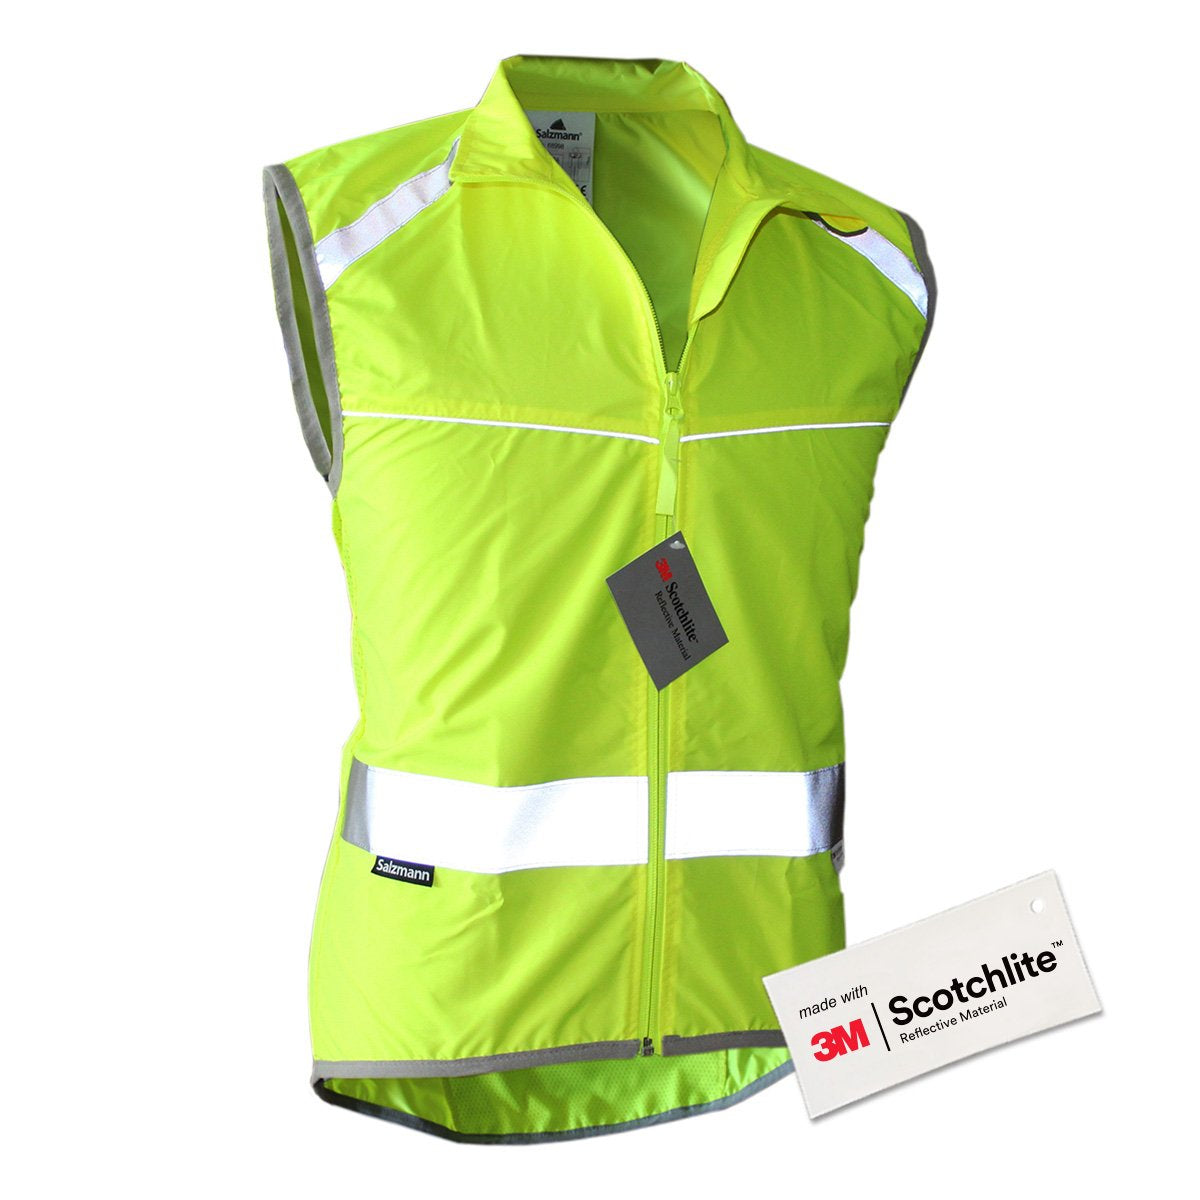 Yellow high visibility cycling vest, front with zip.